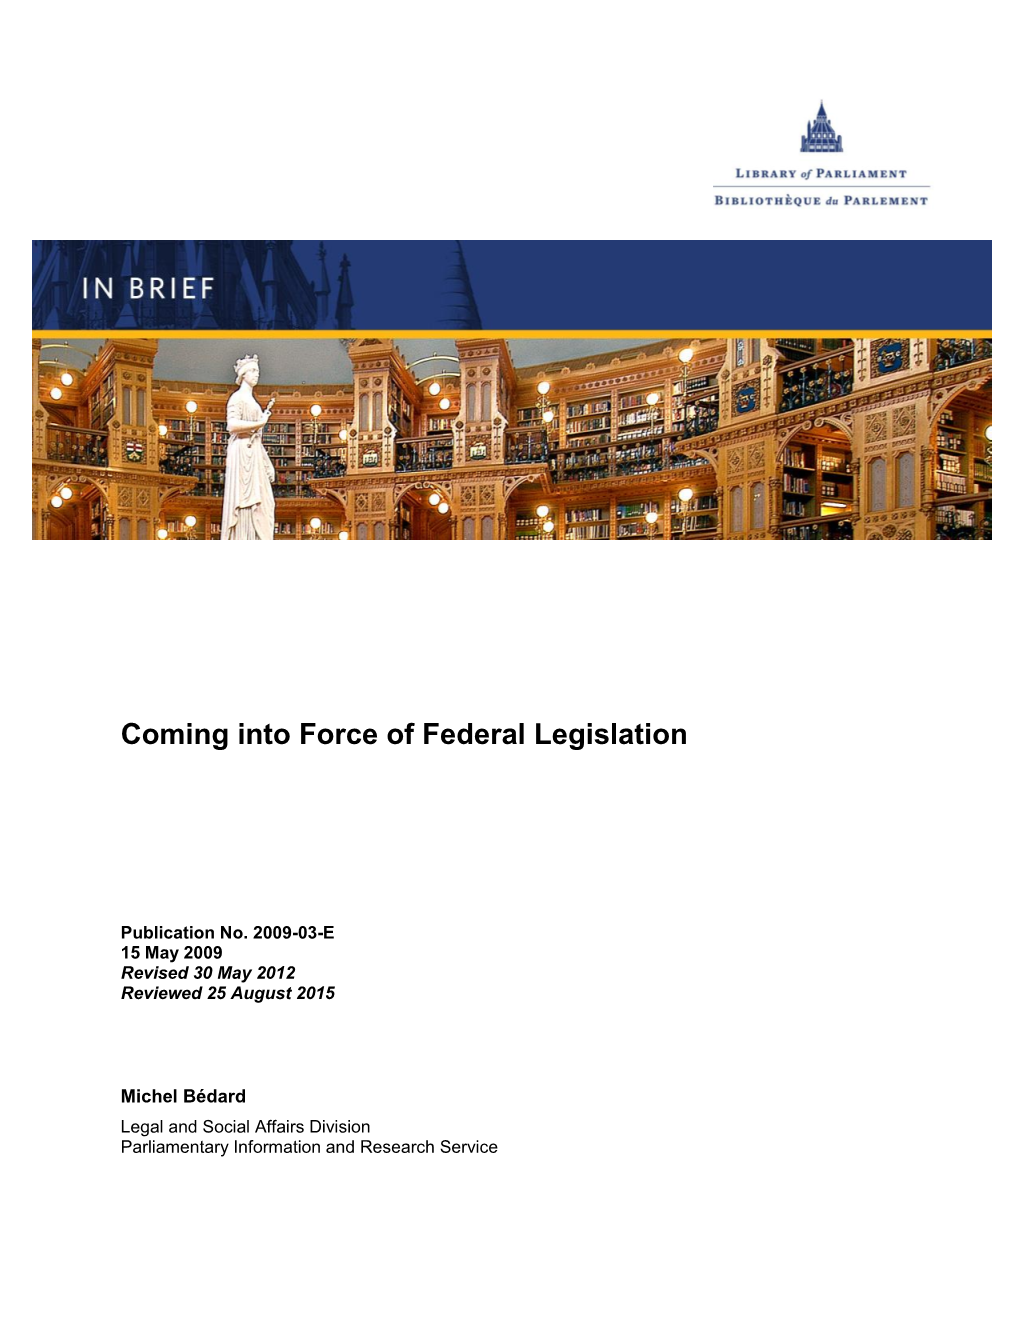 Coming Into Force of Federal Legislation